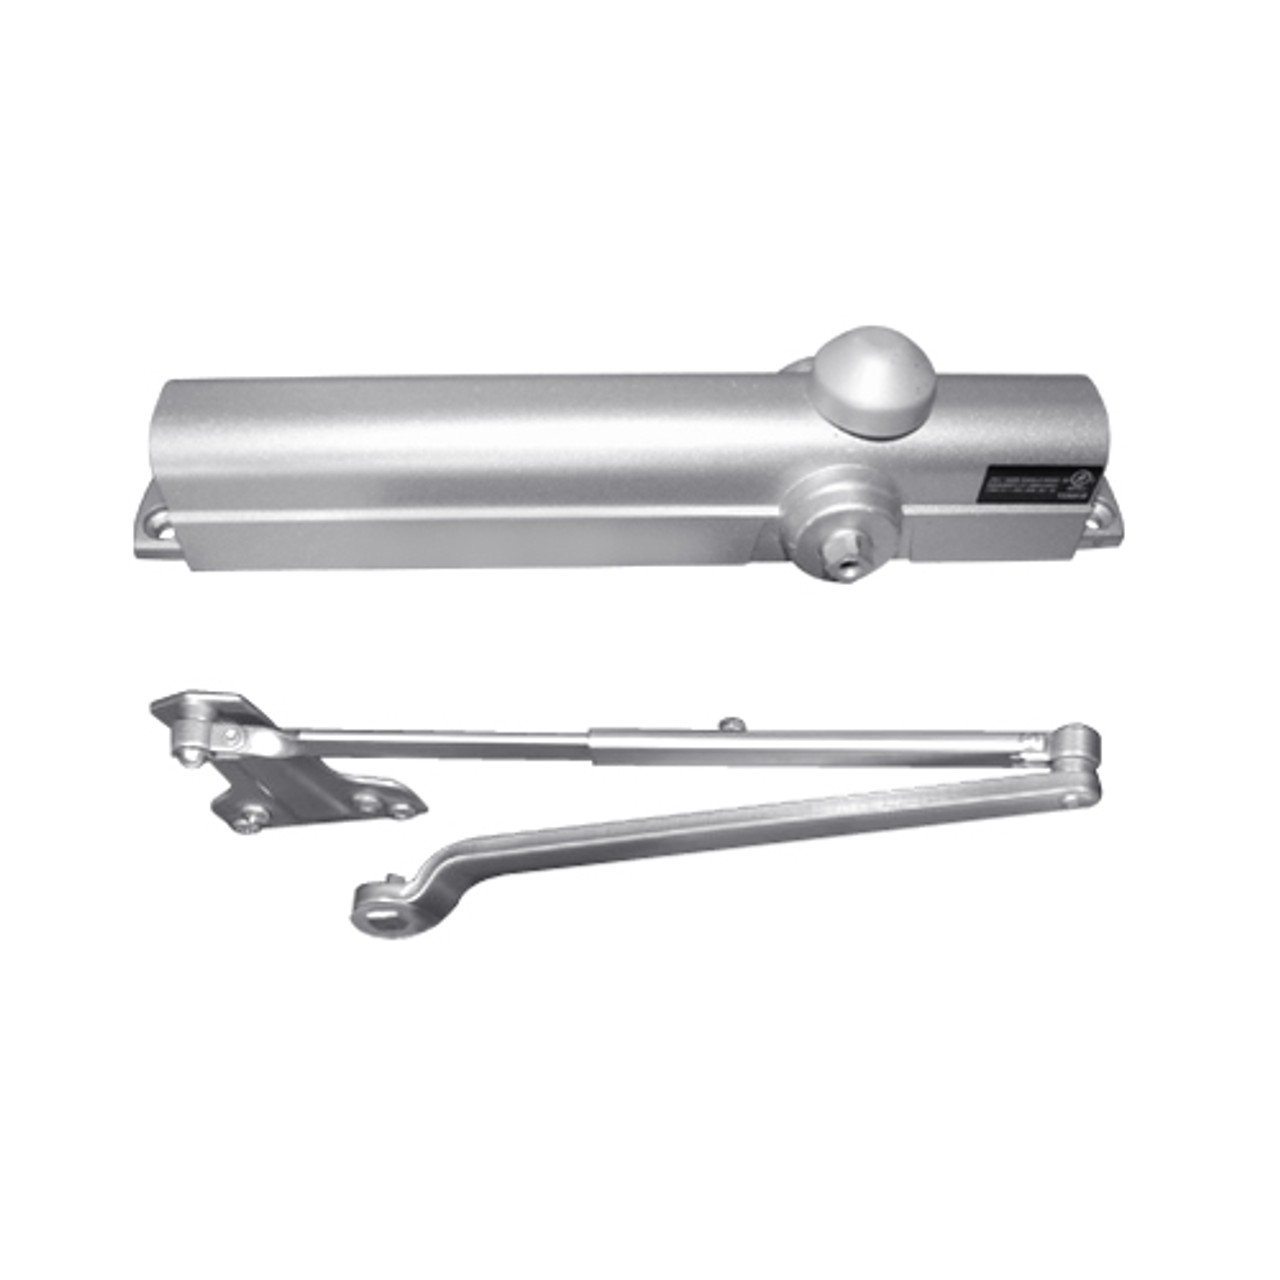 P8181-689 Norton 8000 Series Non-Hold Open Door Closers with Parallel Low Profile Arm in Aluminum Finish